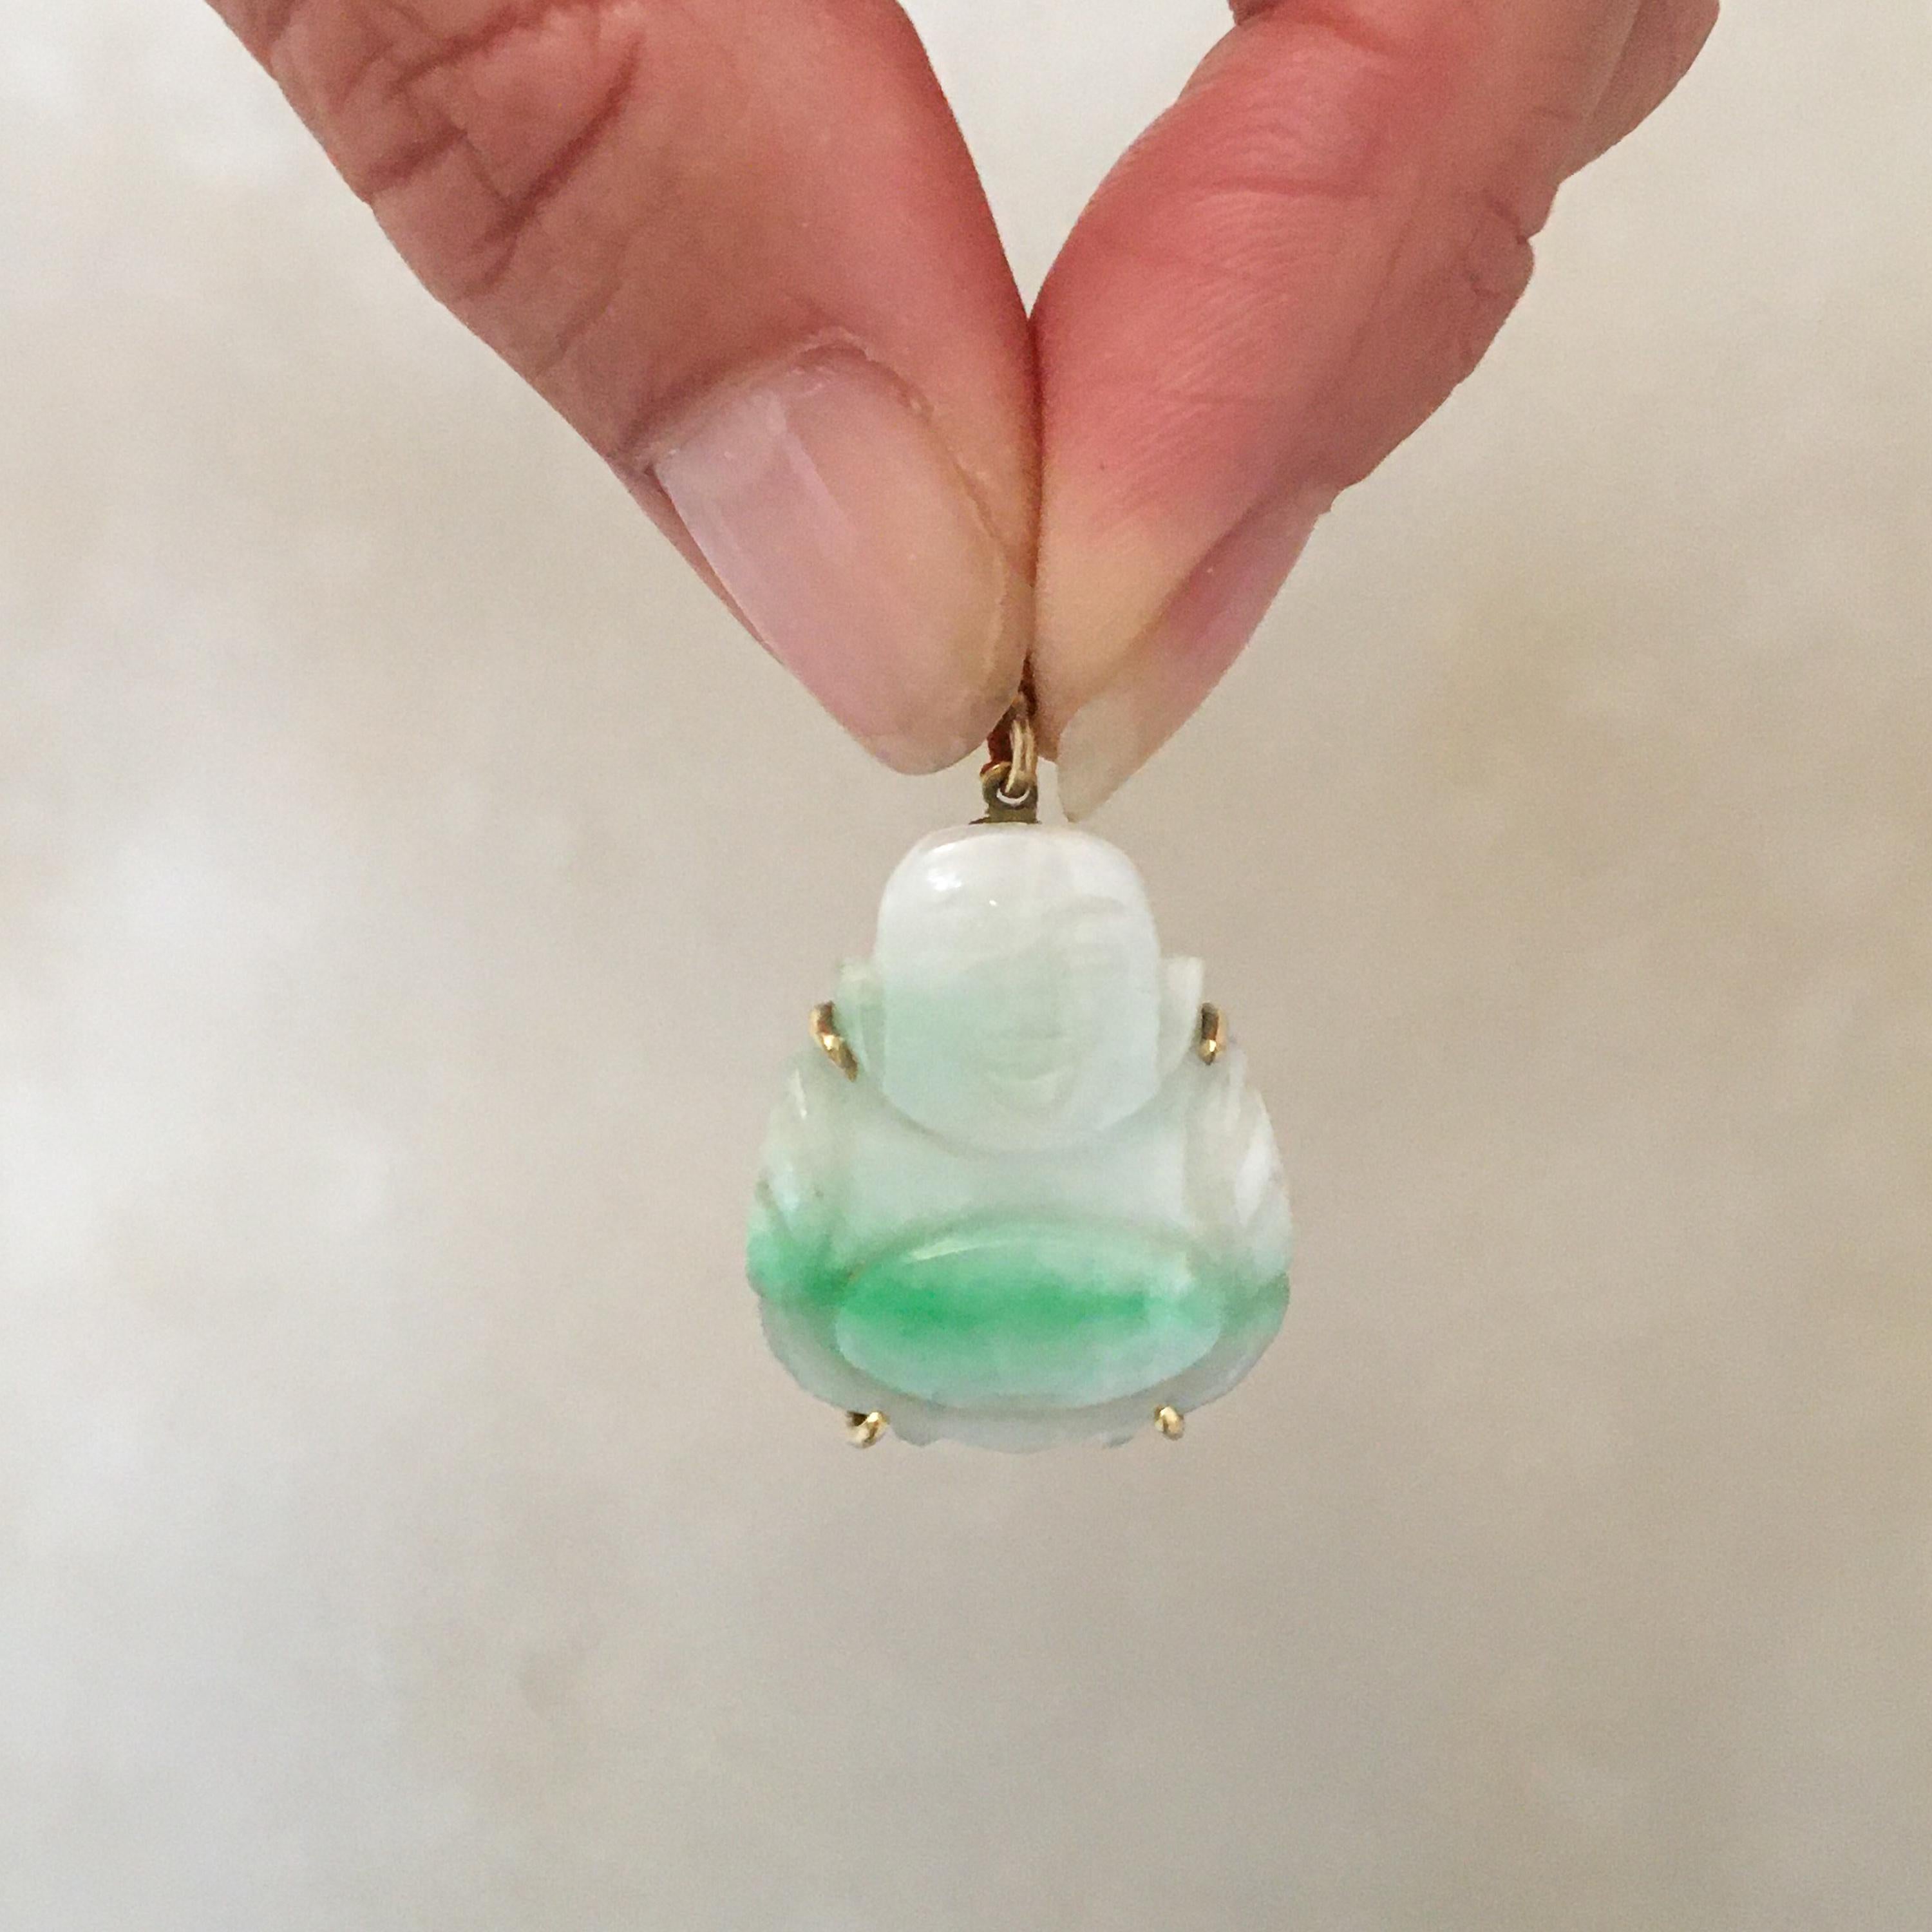 A green and white jade pendant carved in the shape of a smiling seated belly buddha. This pendant is made of jade with a green in white fade color tone. The mounting and eyelet of this lovely buddha is made of 14 karat gold. 

The jade pendant is in